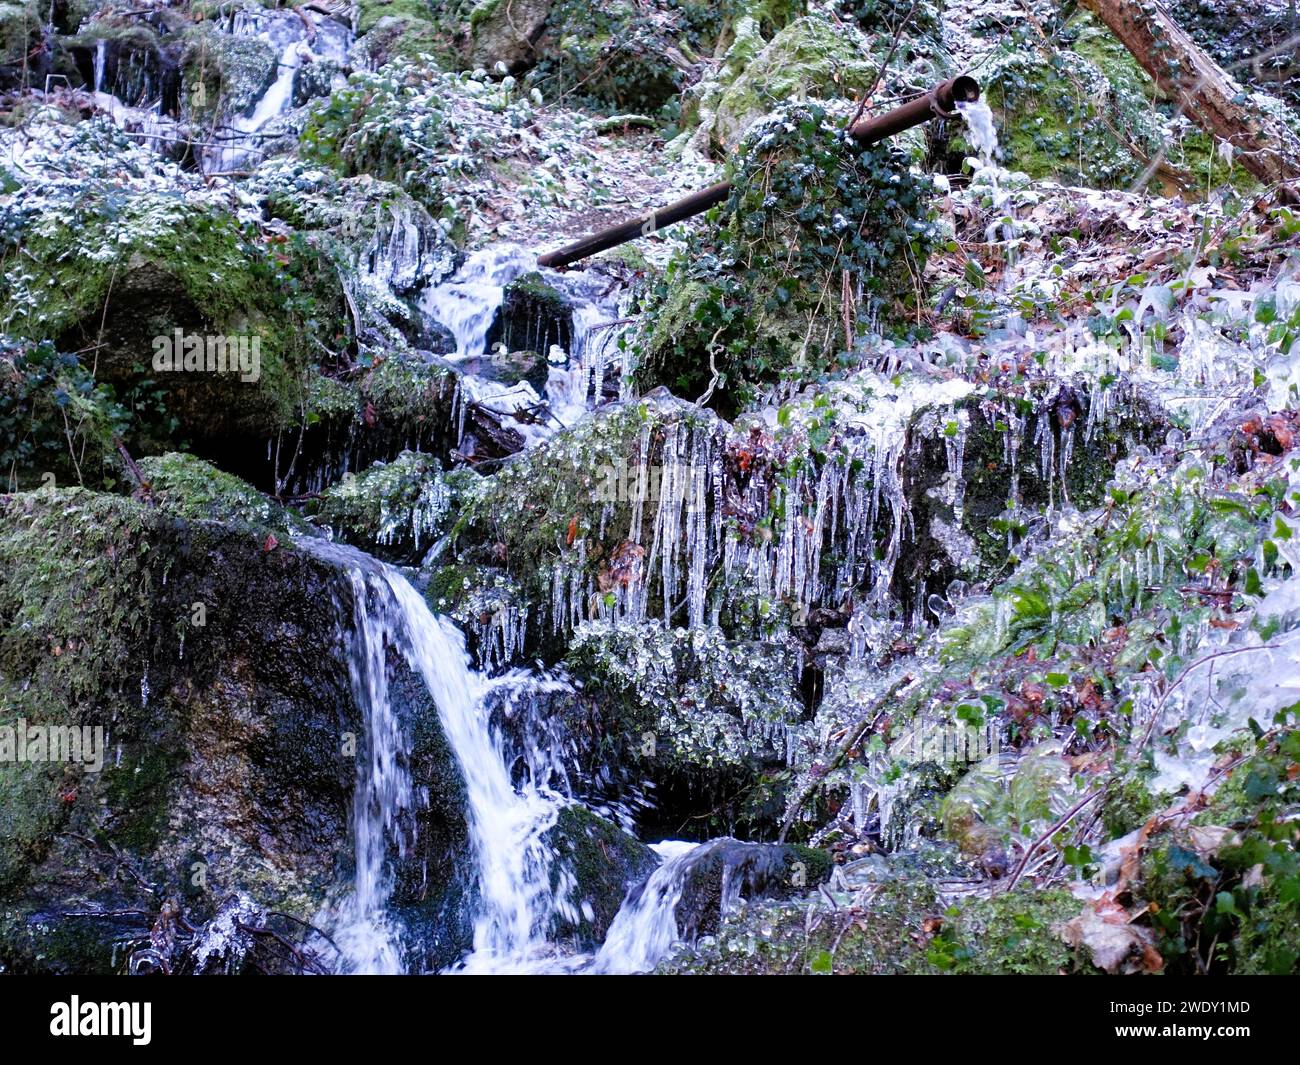 Snow-covered trees and plants encircle a picturesque forest waterfall Stock Photo